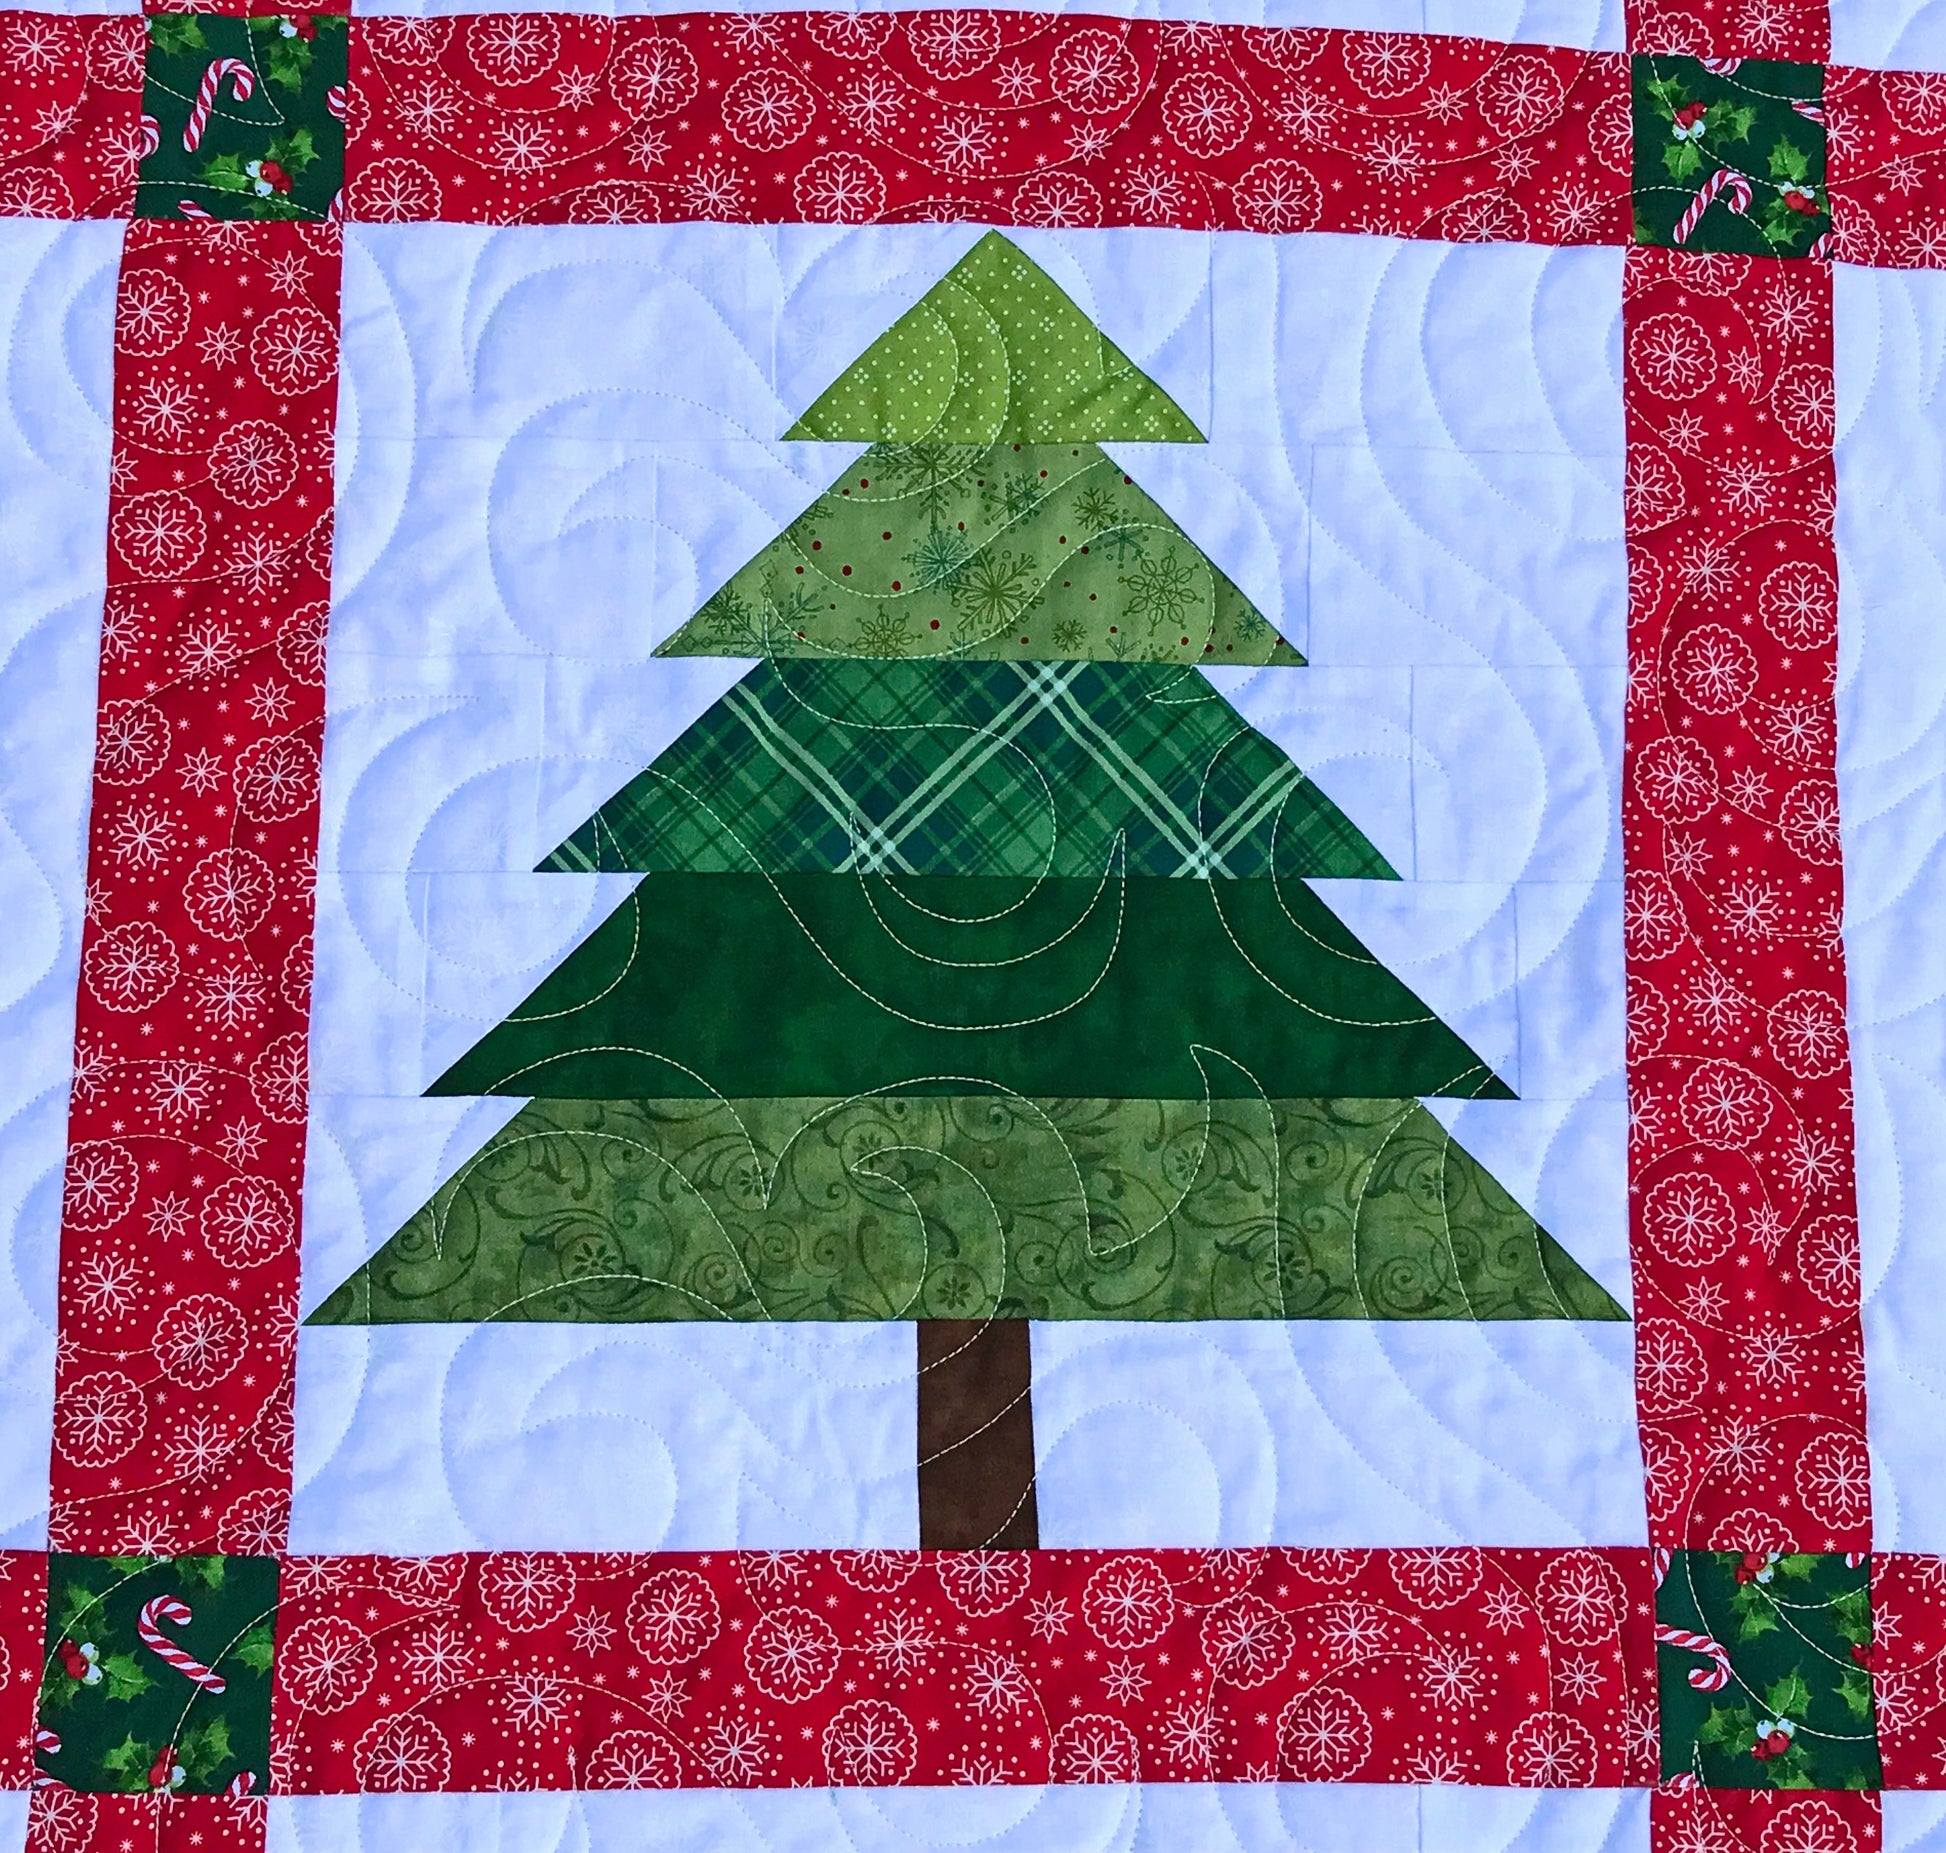 Christmastime quilt pattern with Christmas trees and ornament blocks surrounded by red sashing and a green holly border. Close up of Christmas tree block.